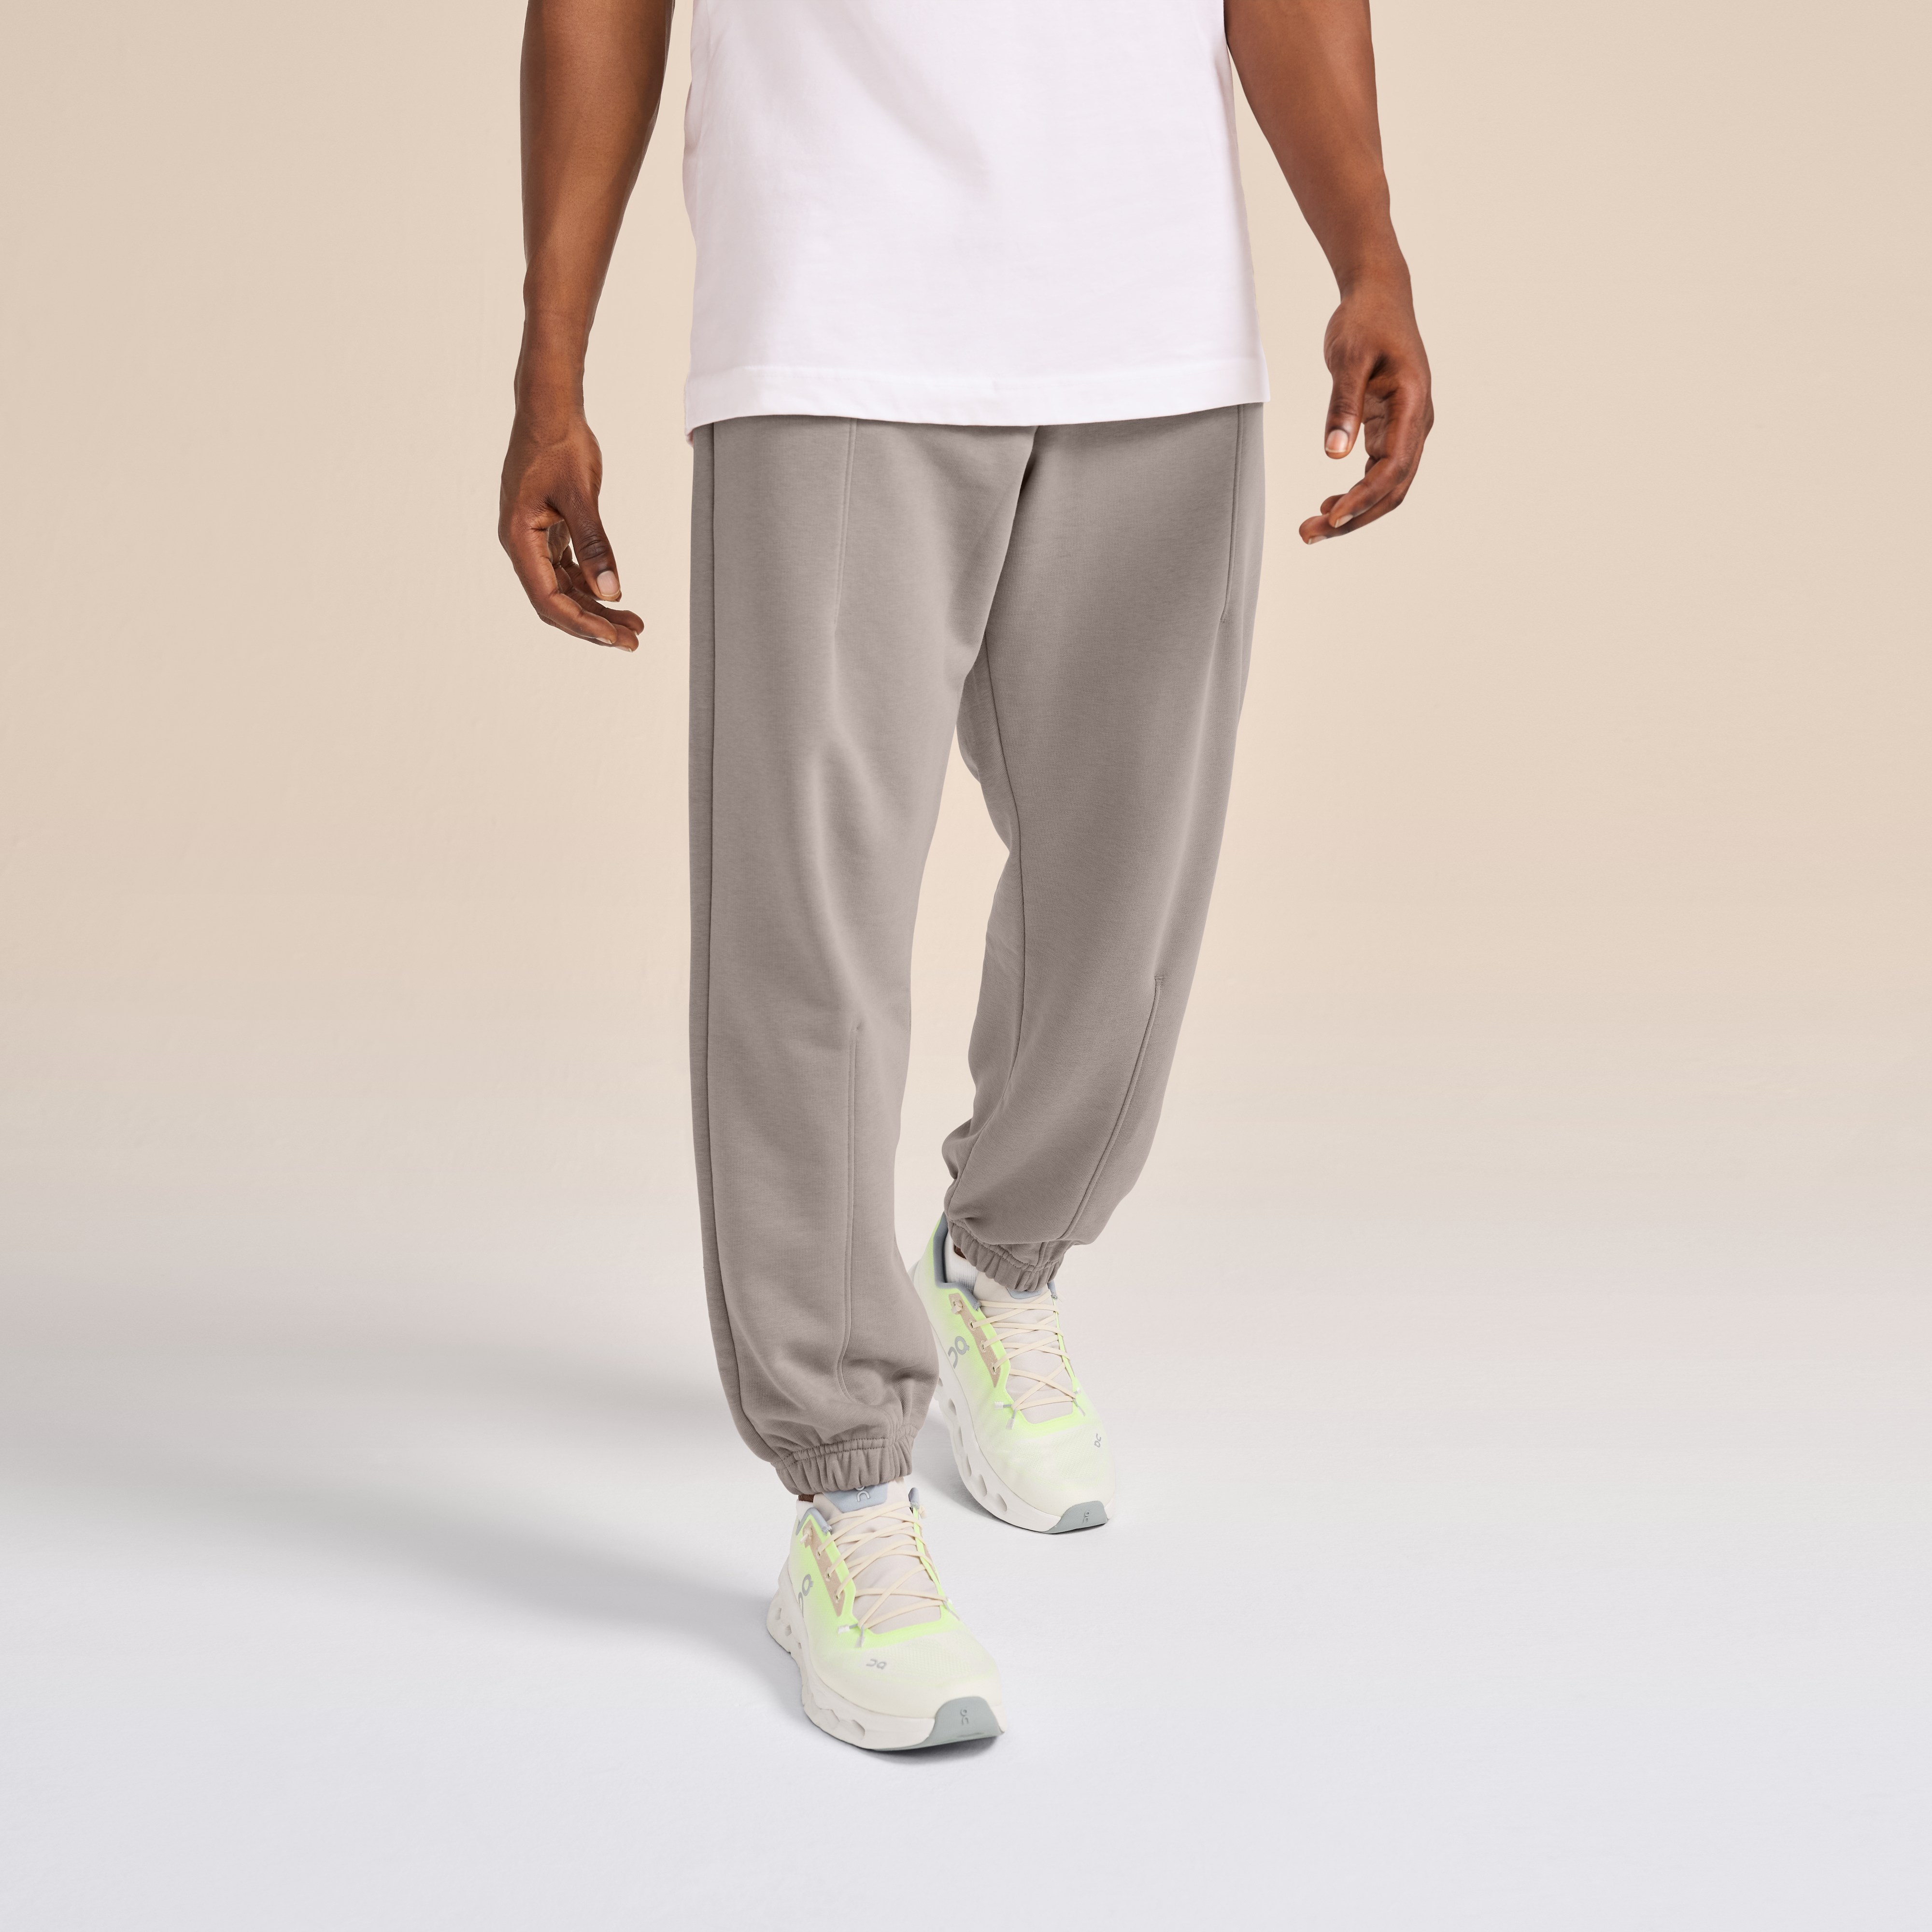 On Club Pant Grey Men Travel, recovery, all-day wear Pants